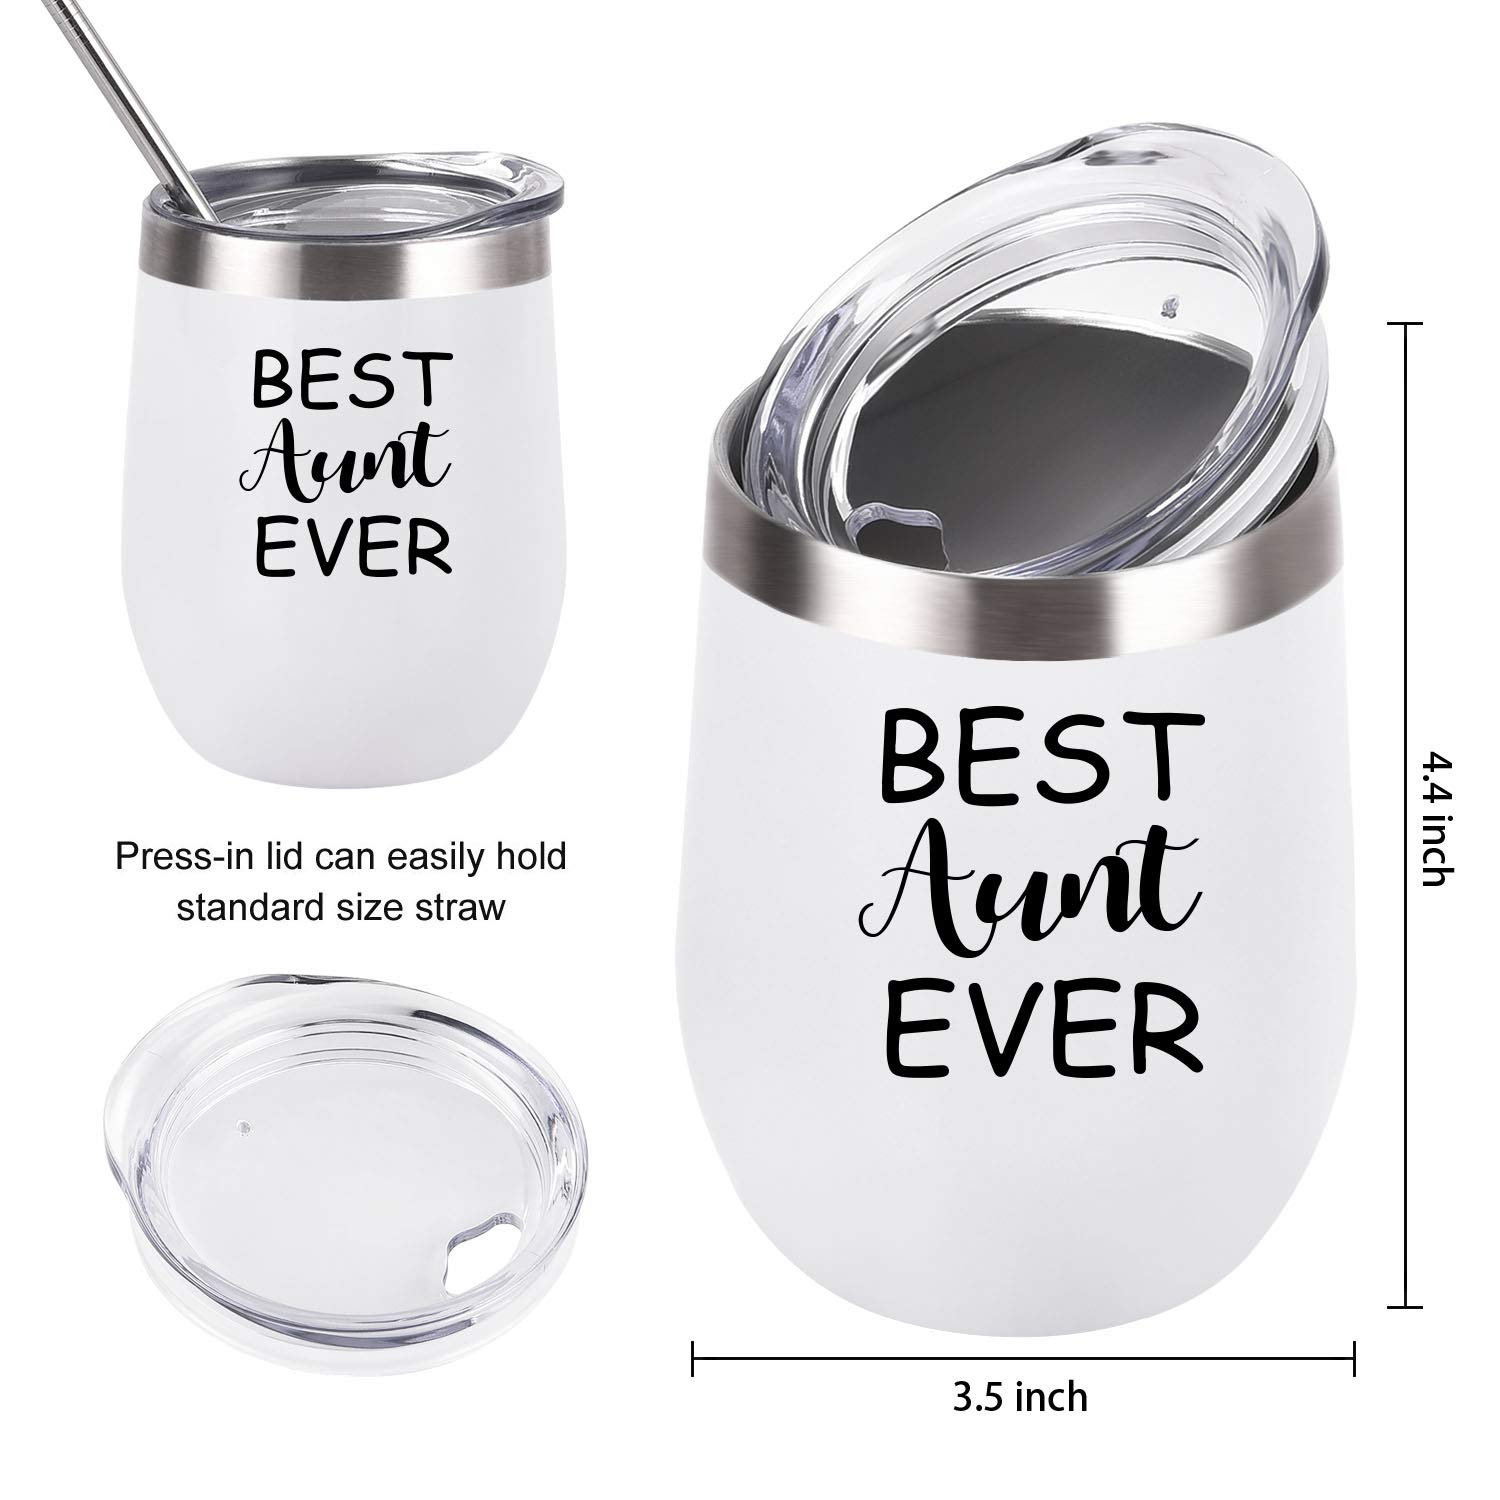 Aunt Uncle Gifts, Best Aunt and Uncle Ever Gift Set, 2 Pack Wine Tumbler with Lid and Straw, Funny Christmas Birthday Gifts for Aunt Uncle, 12 Oz Insulated Stainless Steel Tumbler, Black and White